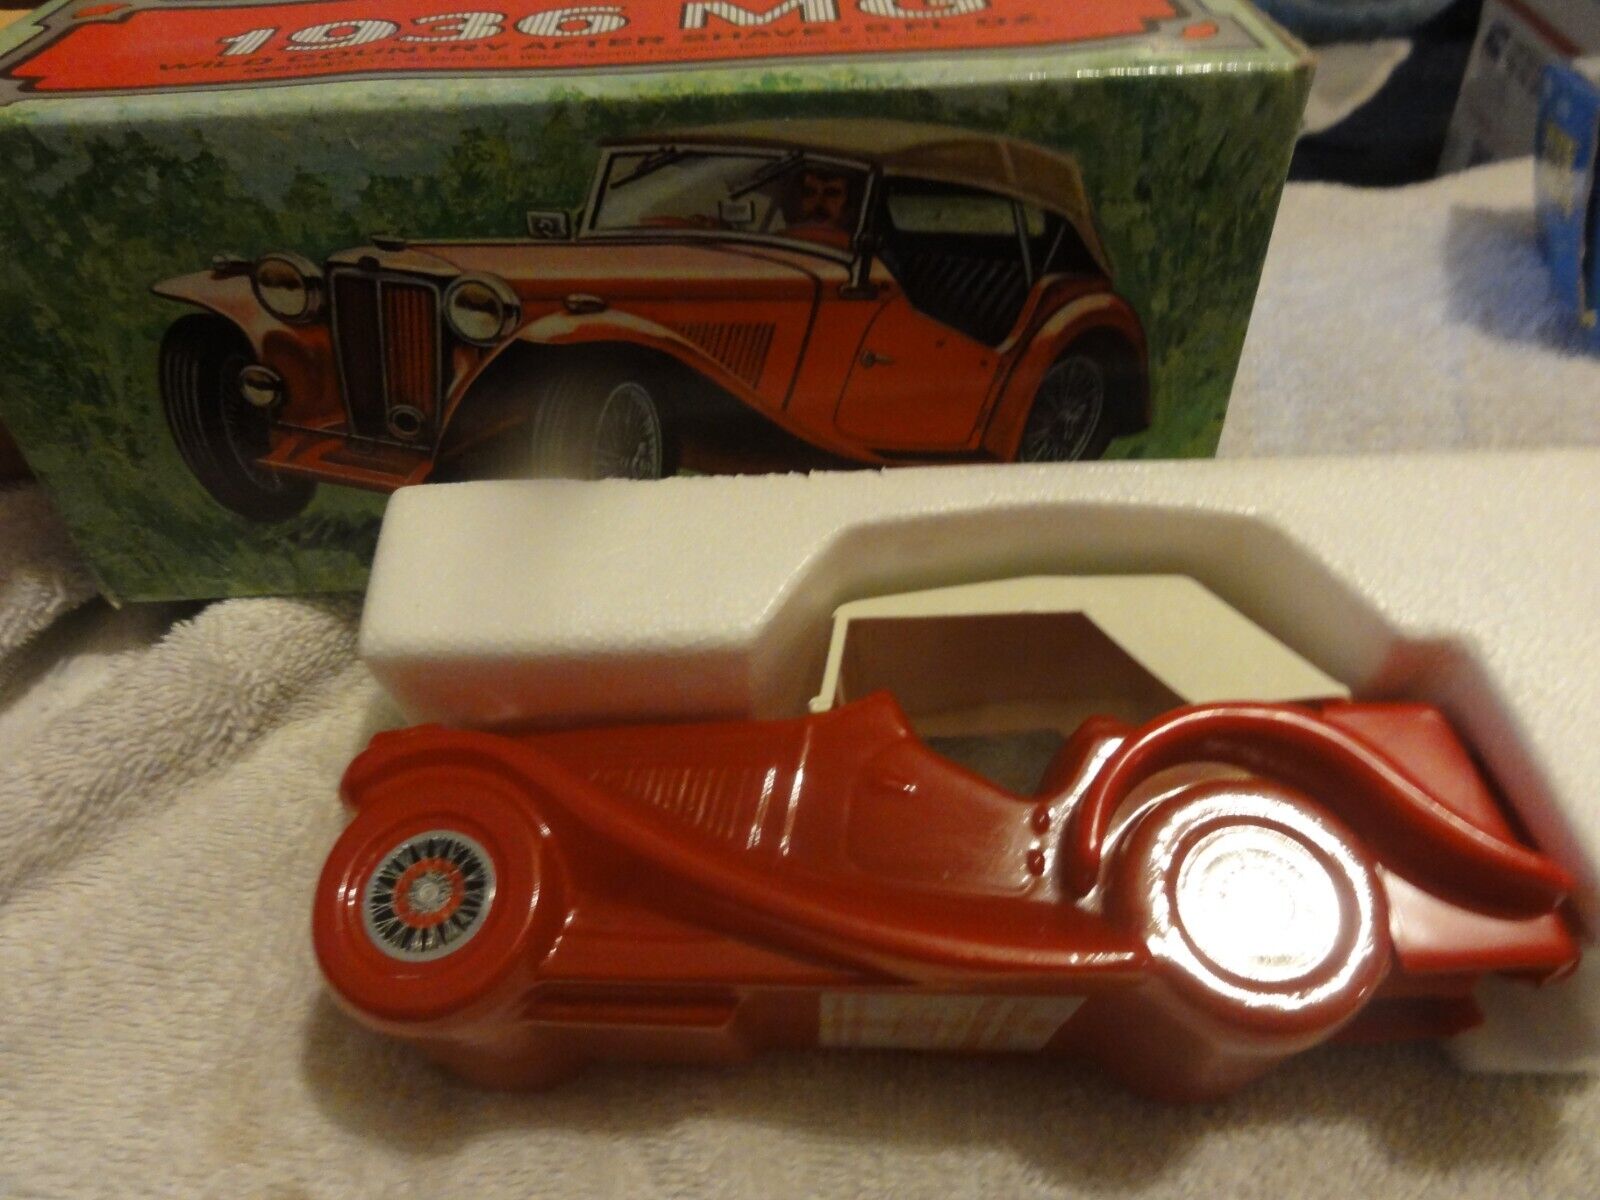 Vintage AVON 1936 MG CAR Full 5oz Wild Country After Shave Decanter Bottle w/Box